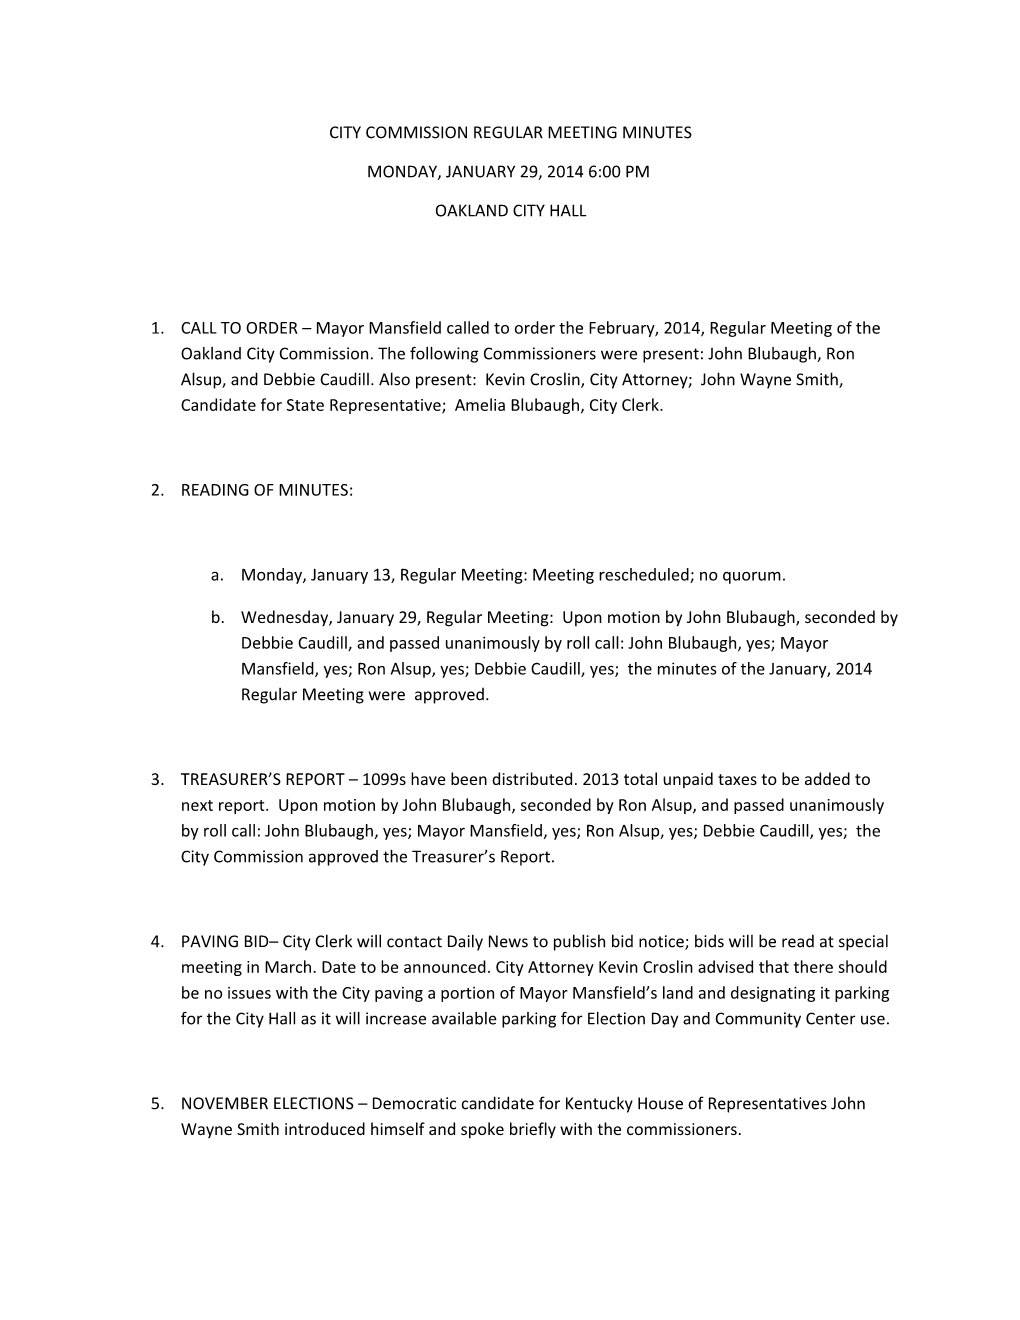 City Commission Regular Meeting Minutes